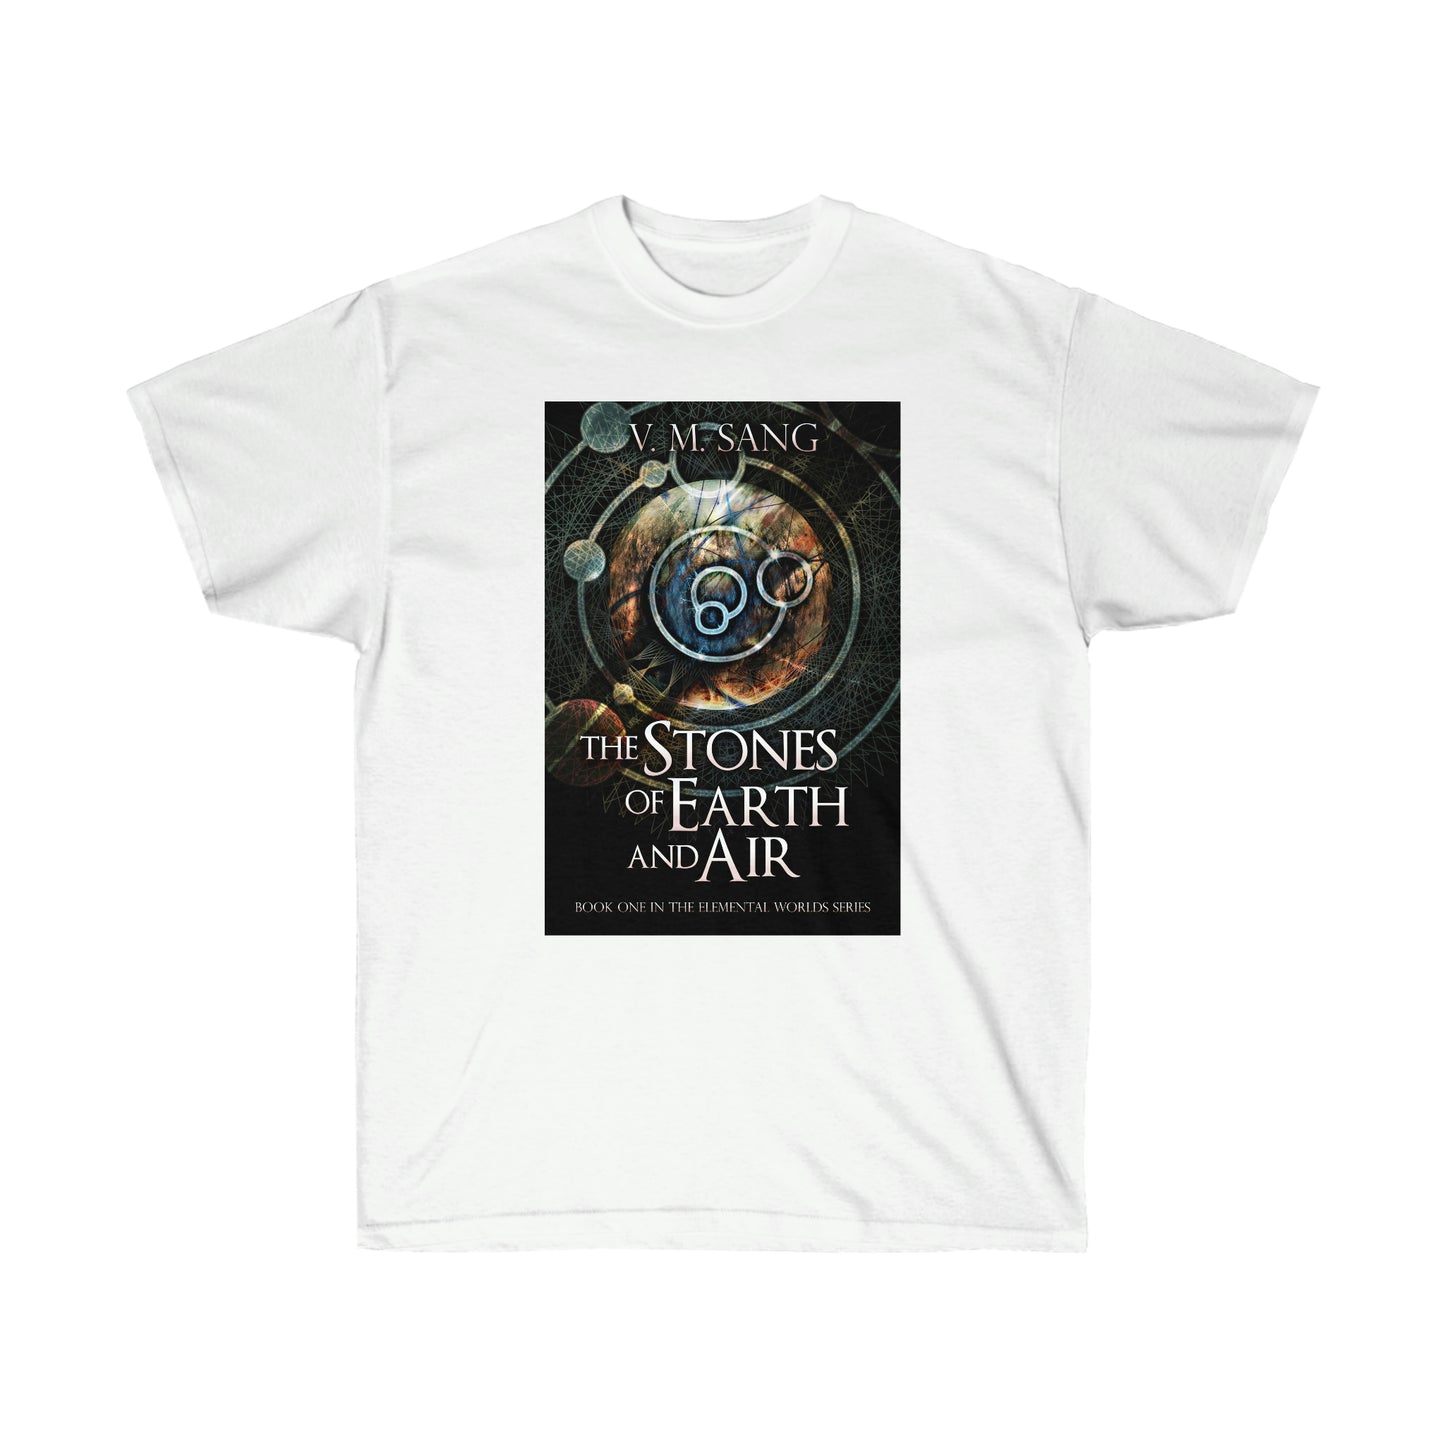 The Stones of Earth and Air - Unisex T-Shirt